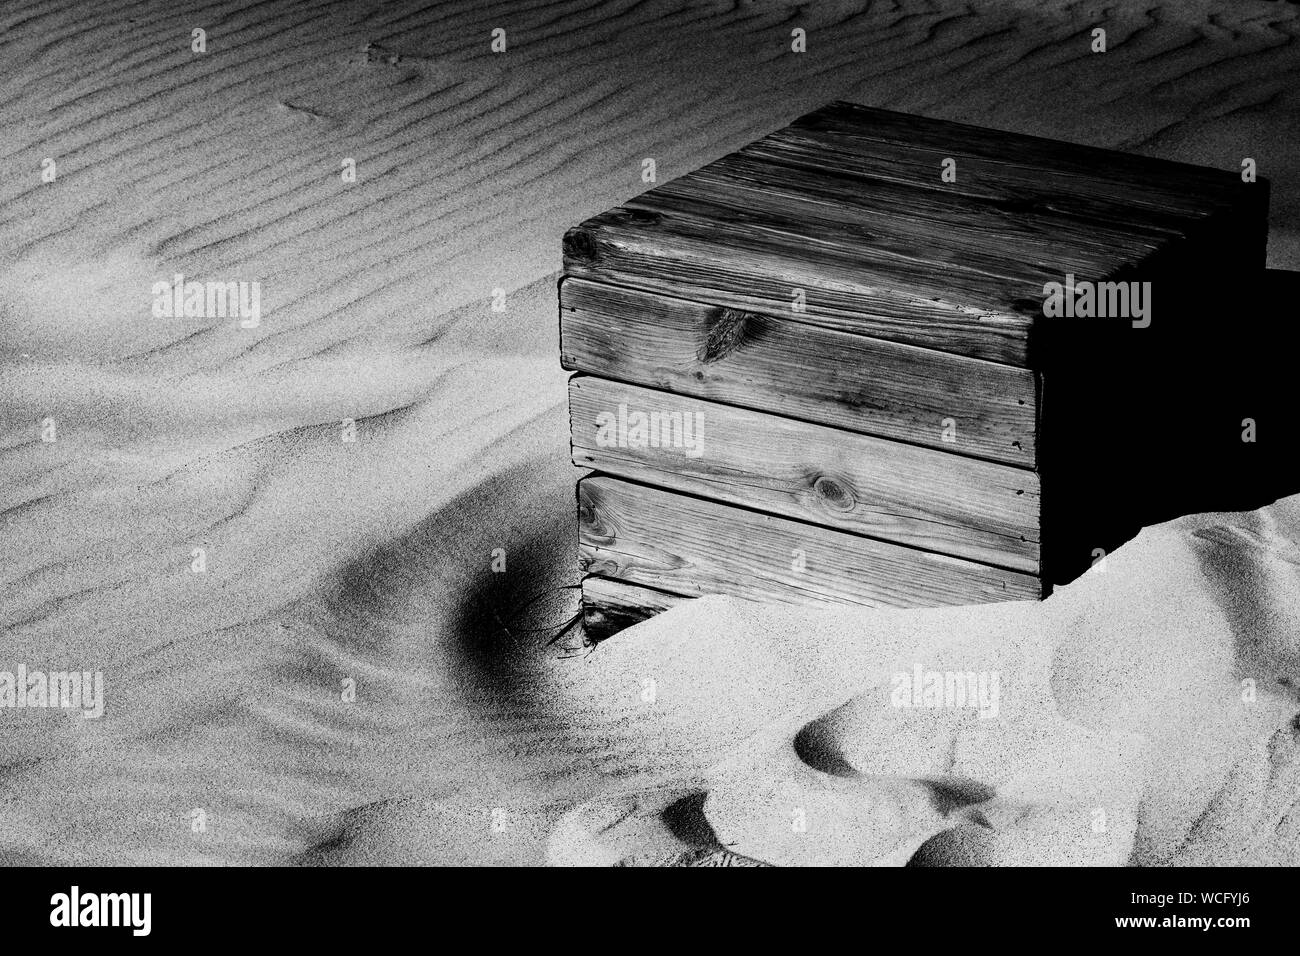 a wooden box being consumed by the sands at Tarifa, Spain in black and white Stock Photo